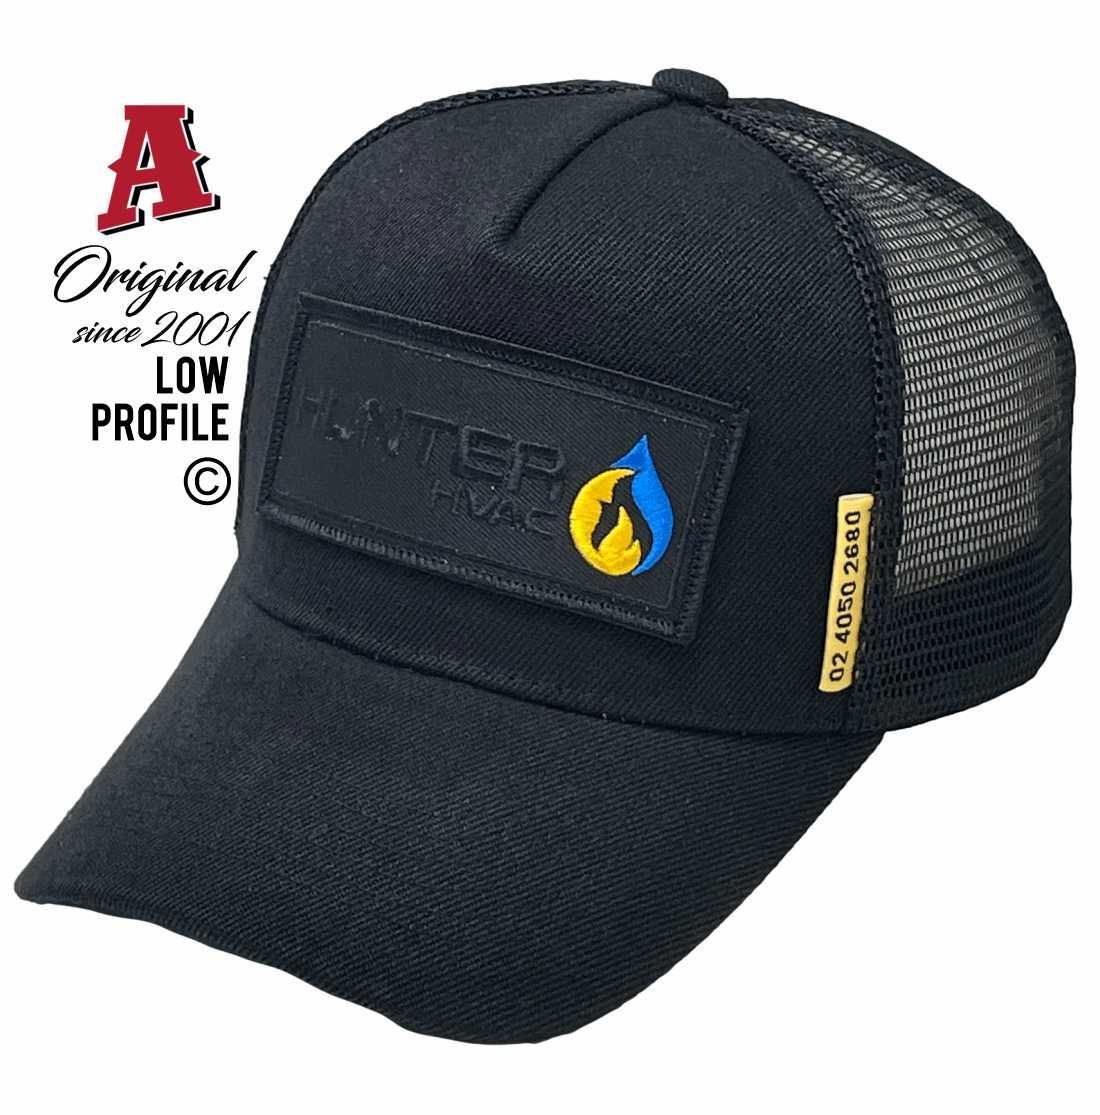 Hunter HVAC Wallsend NSW Basic Aussie Trucker Hats Low Profile with Embroidered Badge with Merrow Edge